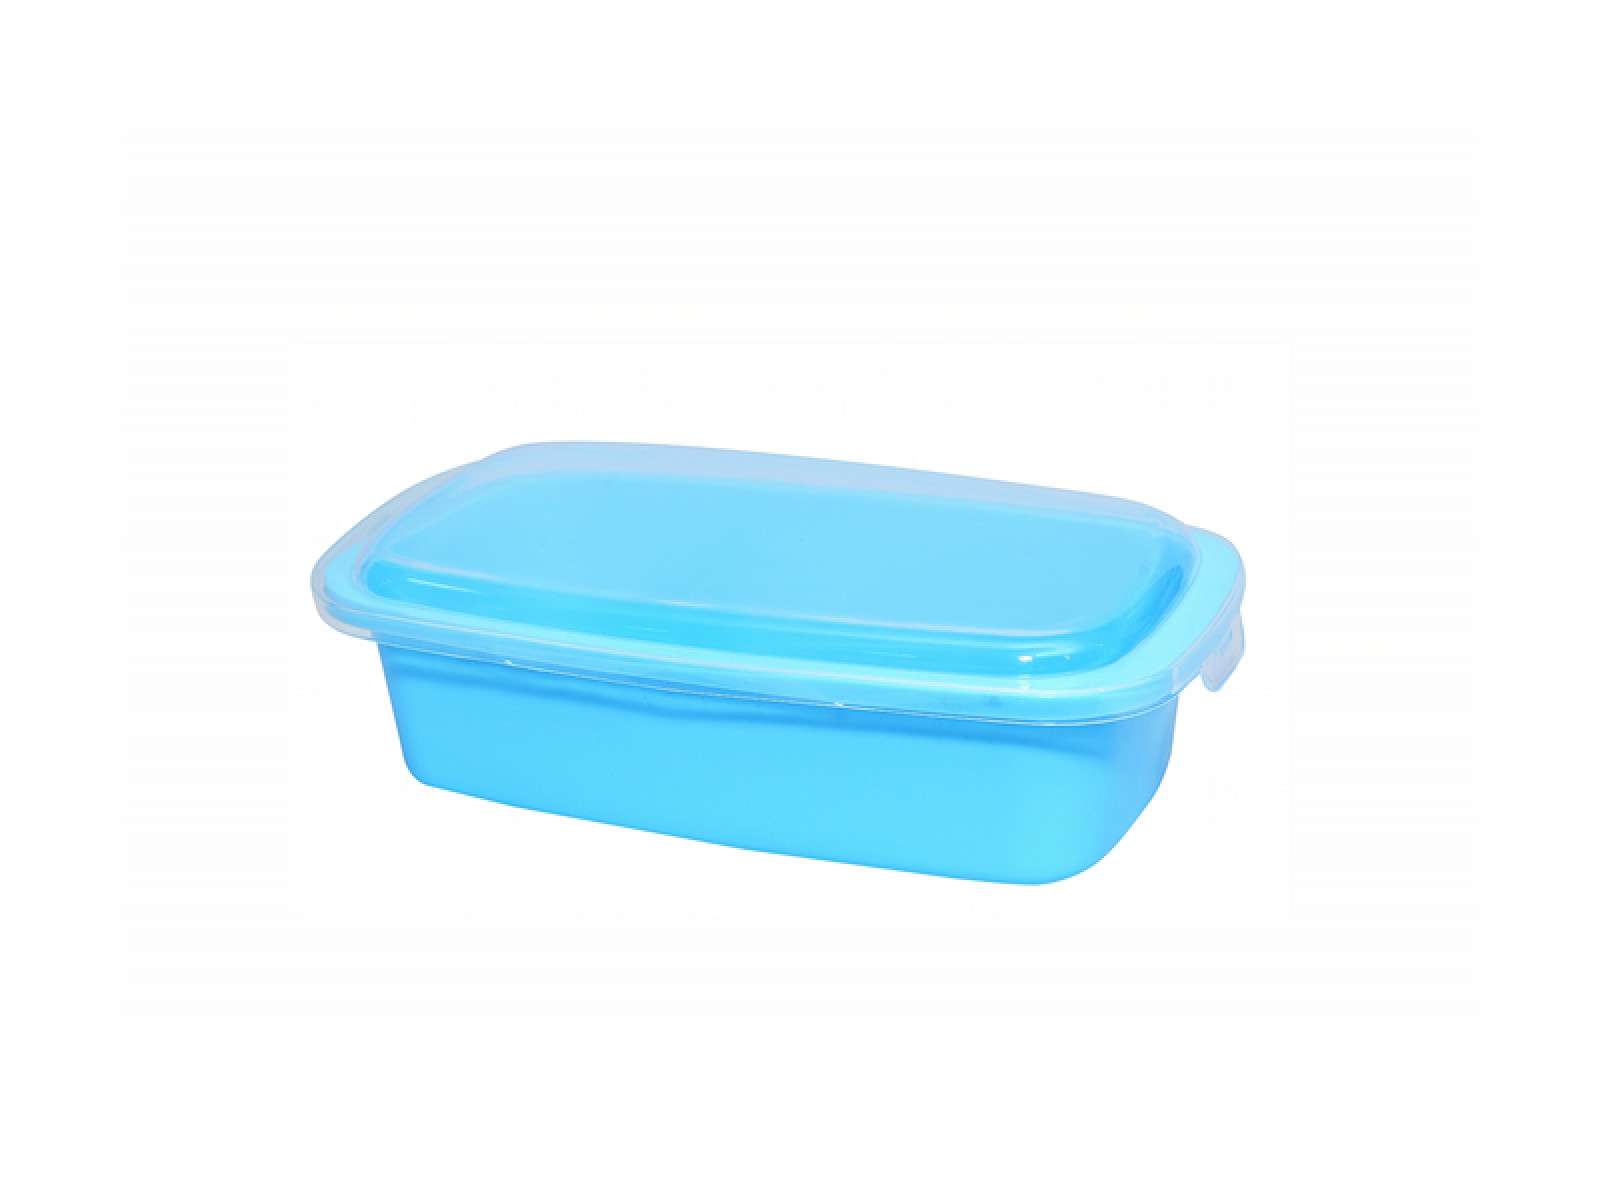 Rounded rectangular container K serries - Large